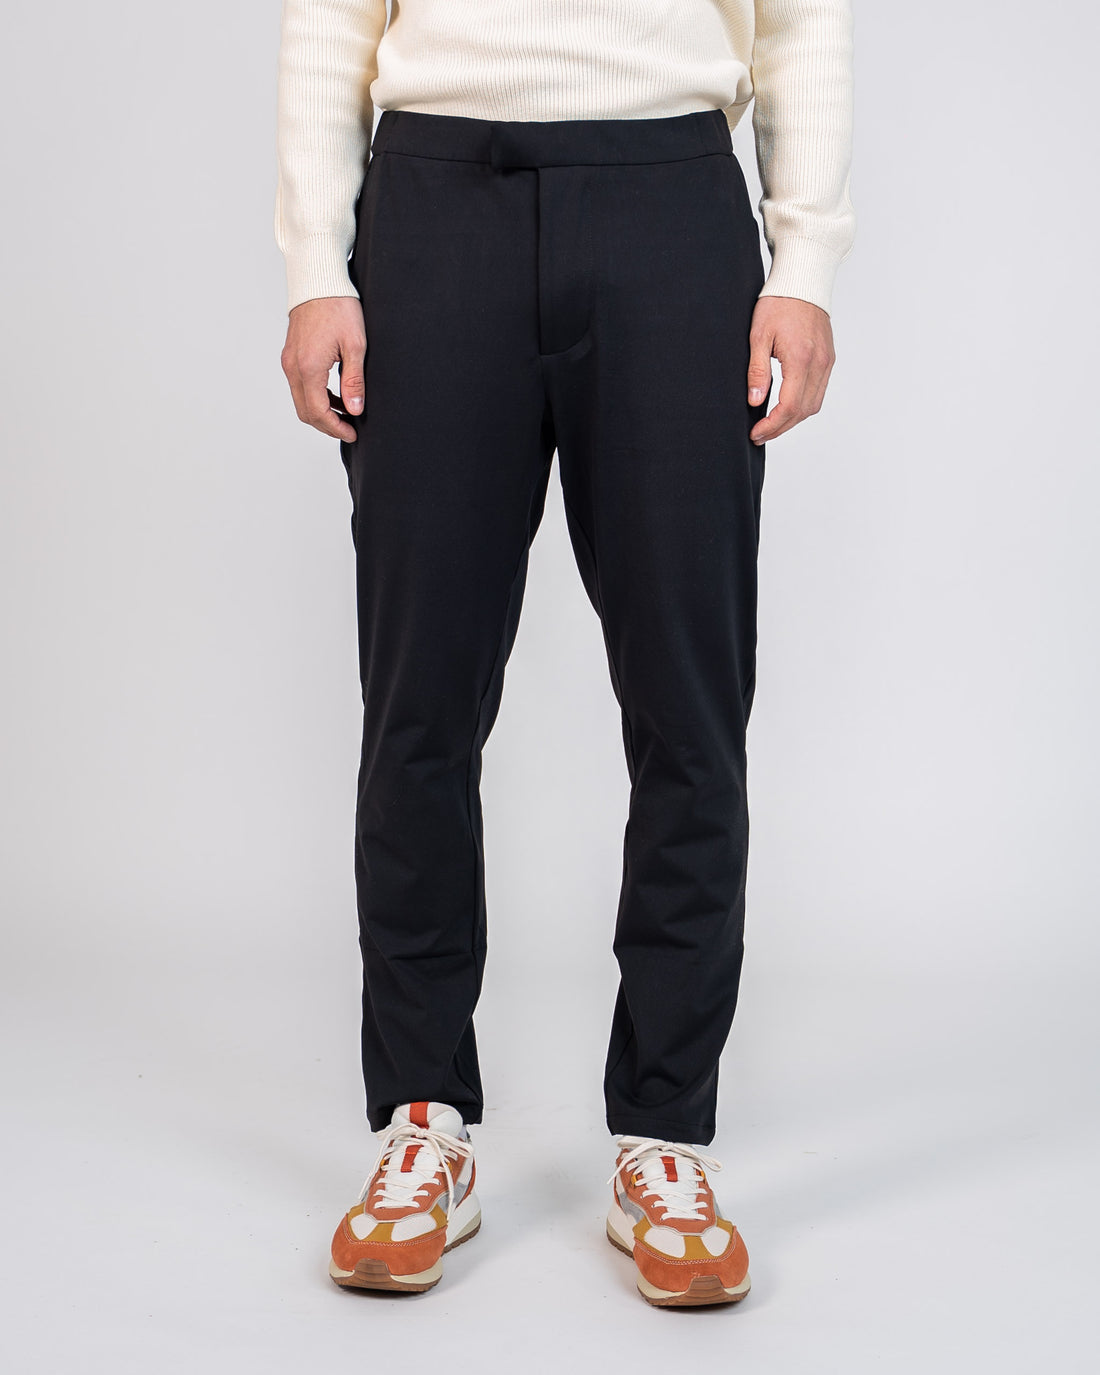 The Everyday Trouser